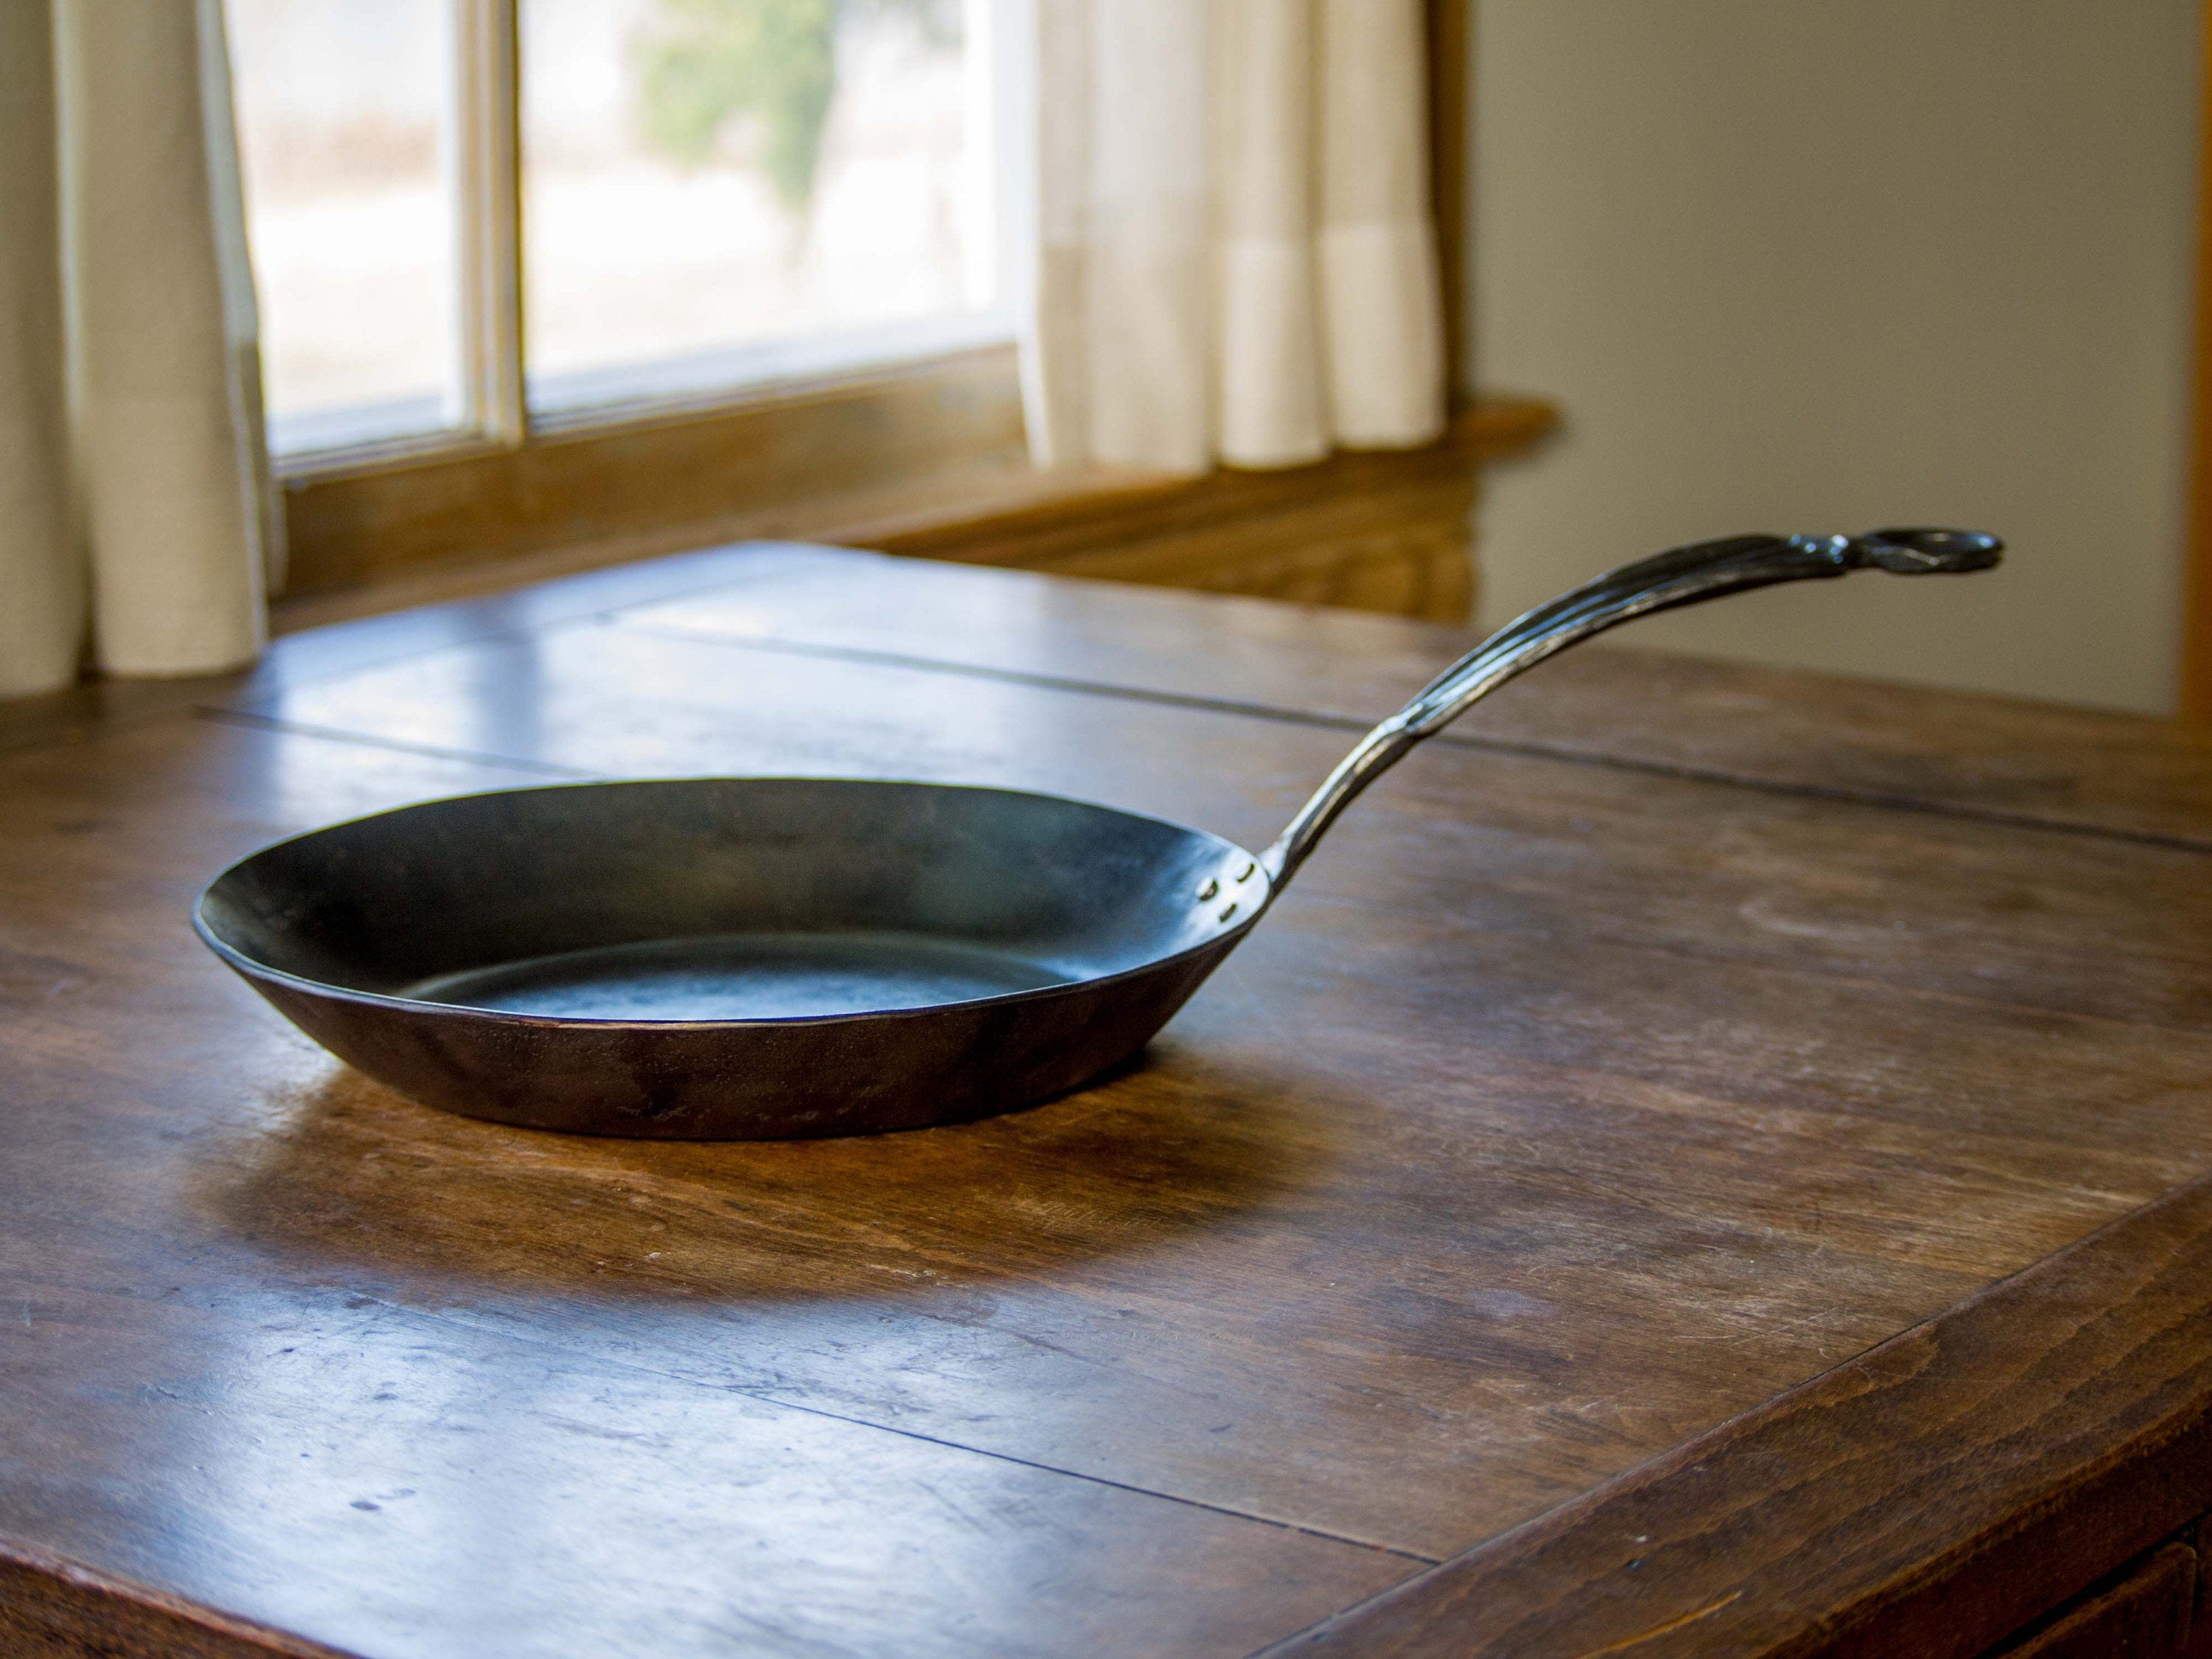 C-01A Hand forged frying pan with an oak handle - big 